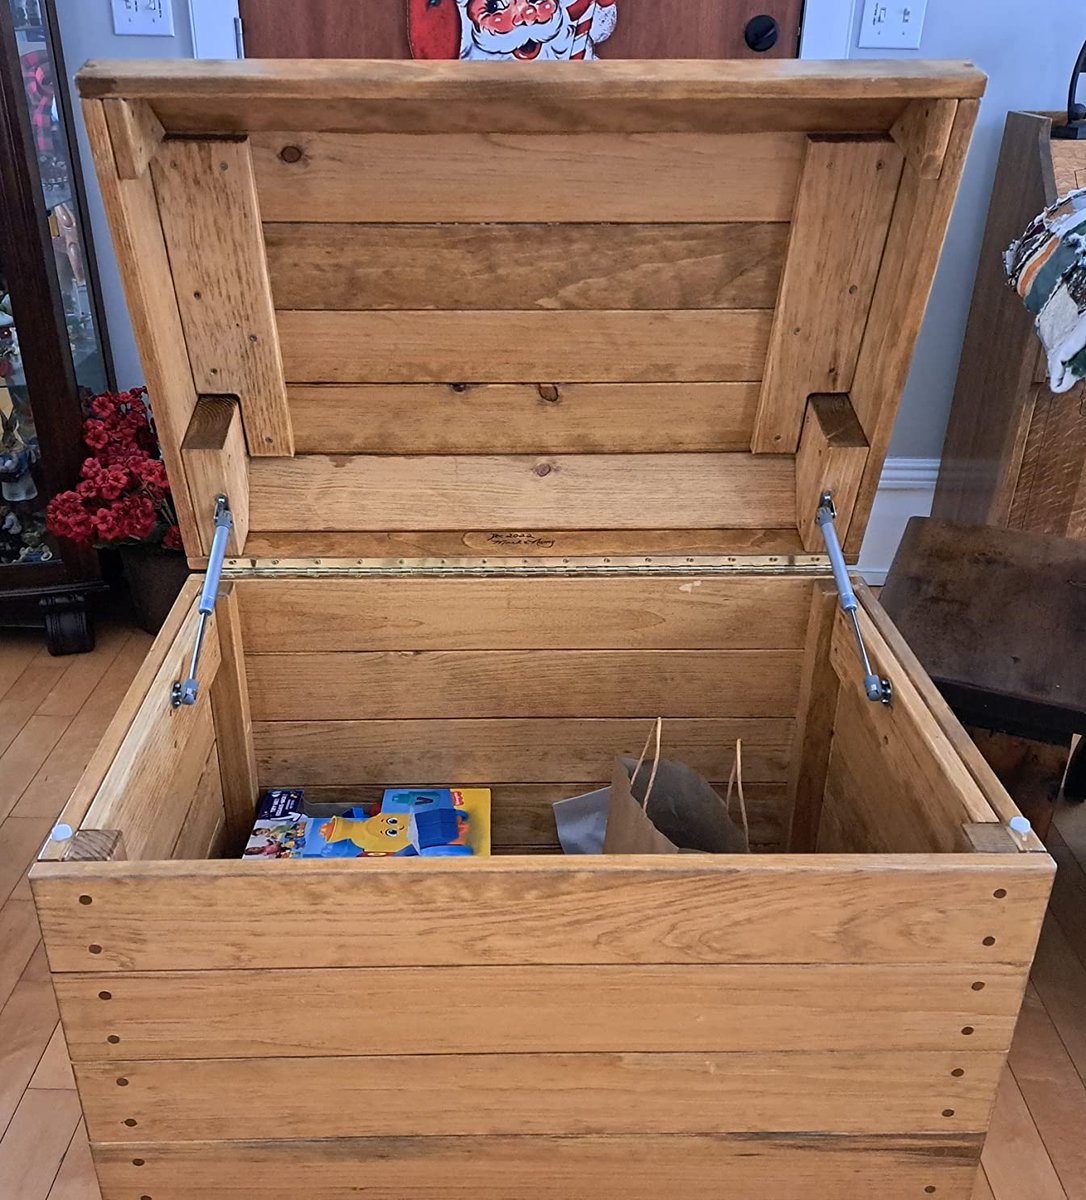 DIY a box for groceries with hydraulic gas strut lift support.
vadania.com/product-catego…

#vadania #hardwaretools #cabinethardware #homedecor #housedesign #homedesign #kitchendecor #kitchendesign #remodeling #woodworking #woodwork #woodworktools #lifeidea #lifetip #diy